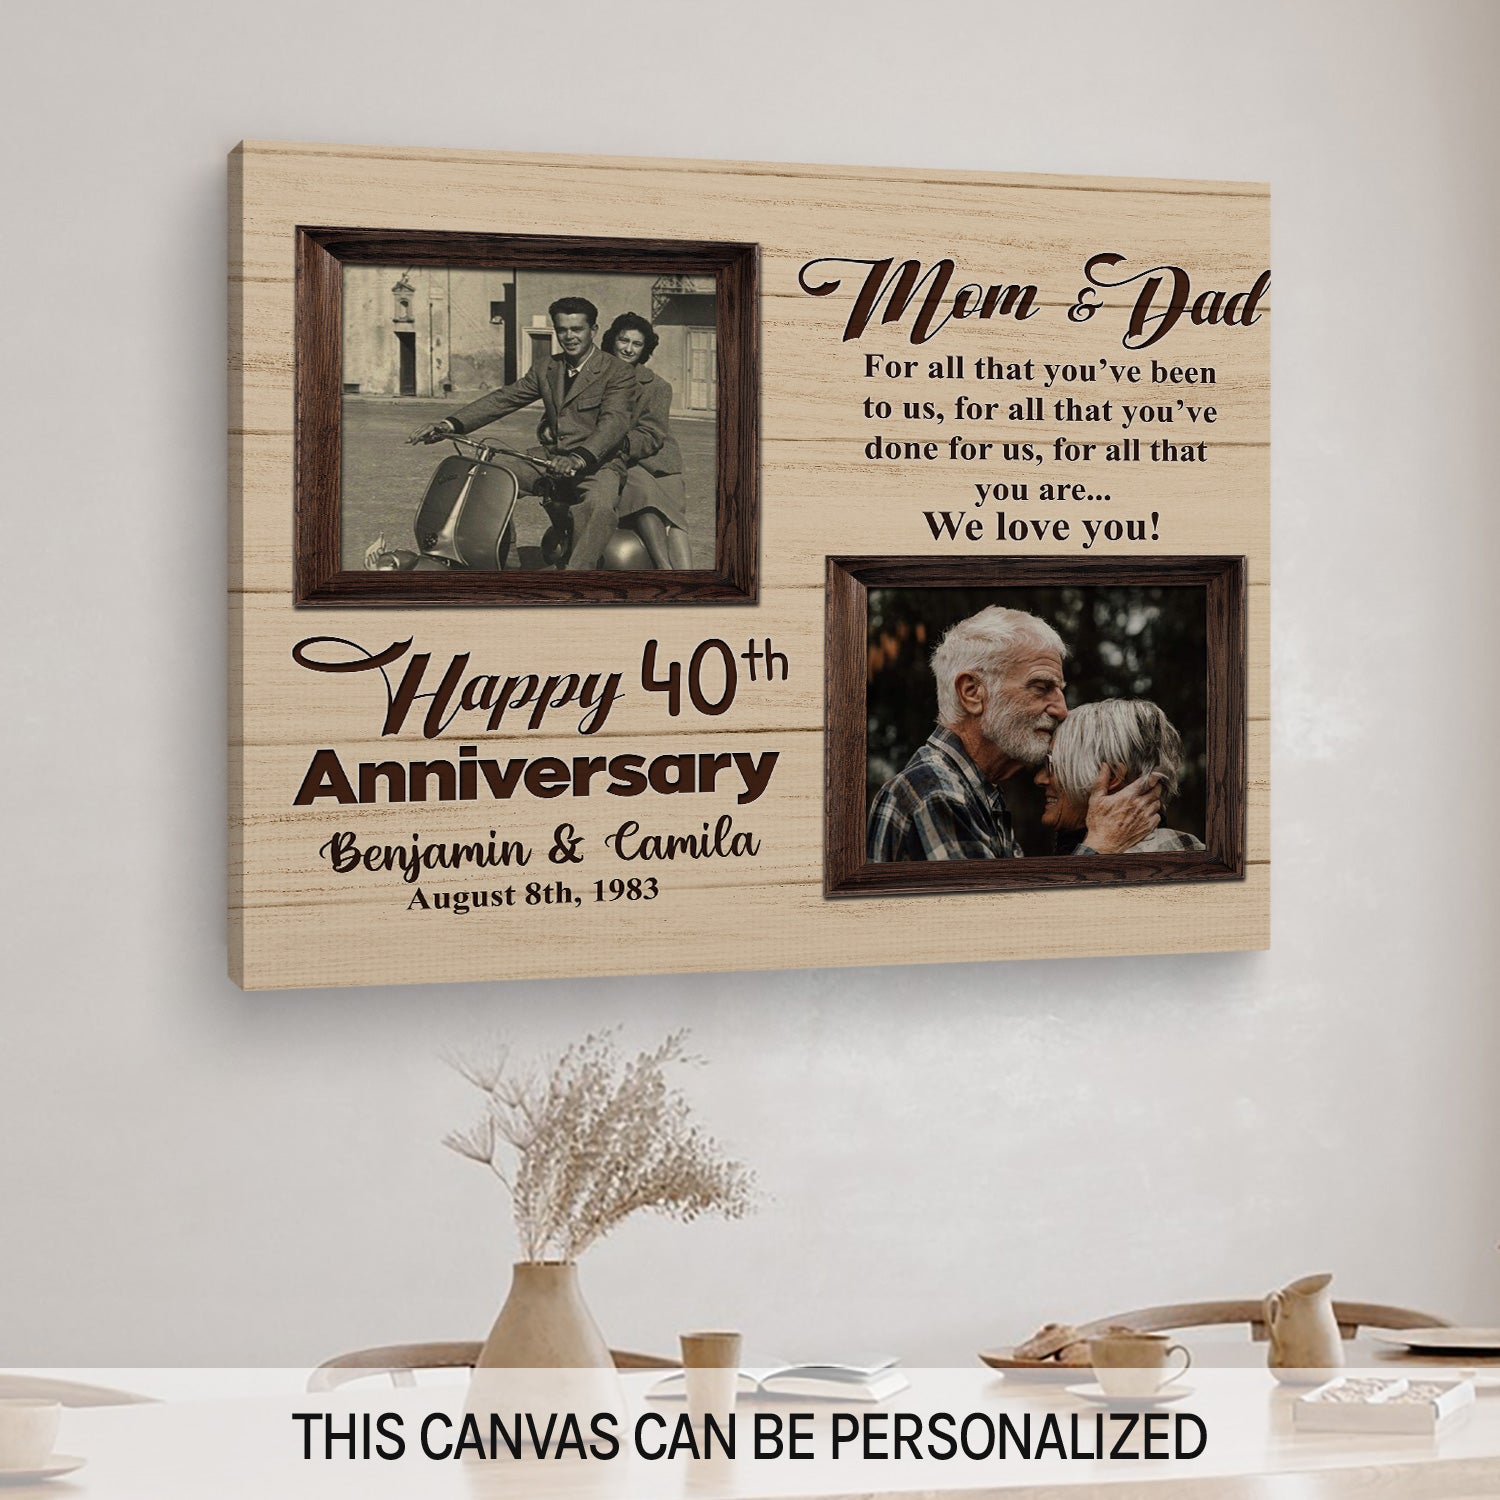 15+ Unique and beautiful wedding anniversary gift ideas for parent… |  Unique wedding anniversary gifts, 50 wedding anniversary gifts, 40th  wedding anniversary gifts